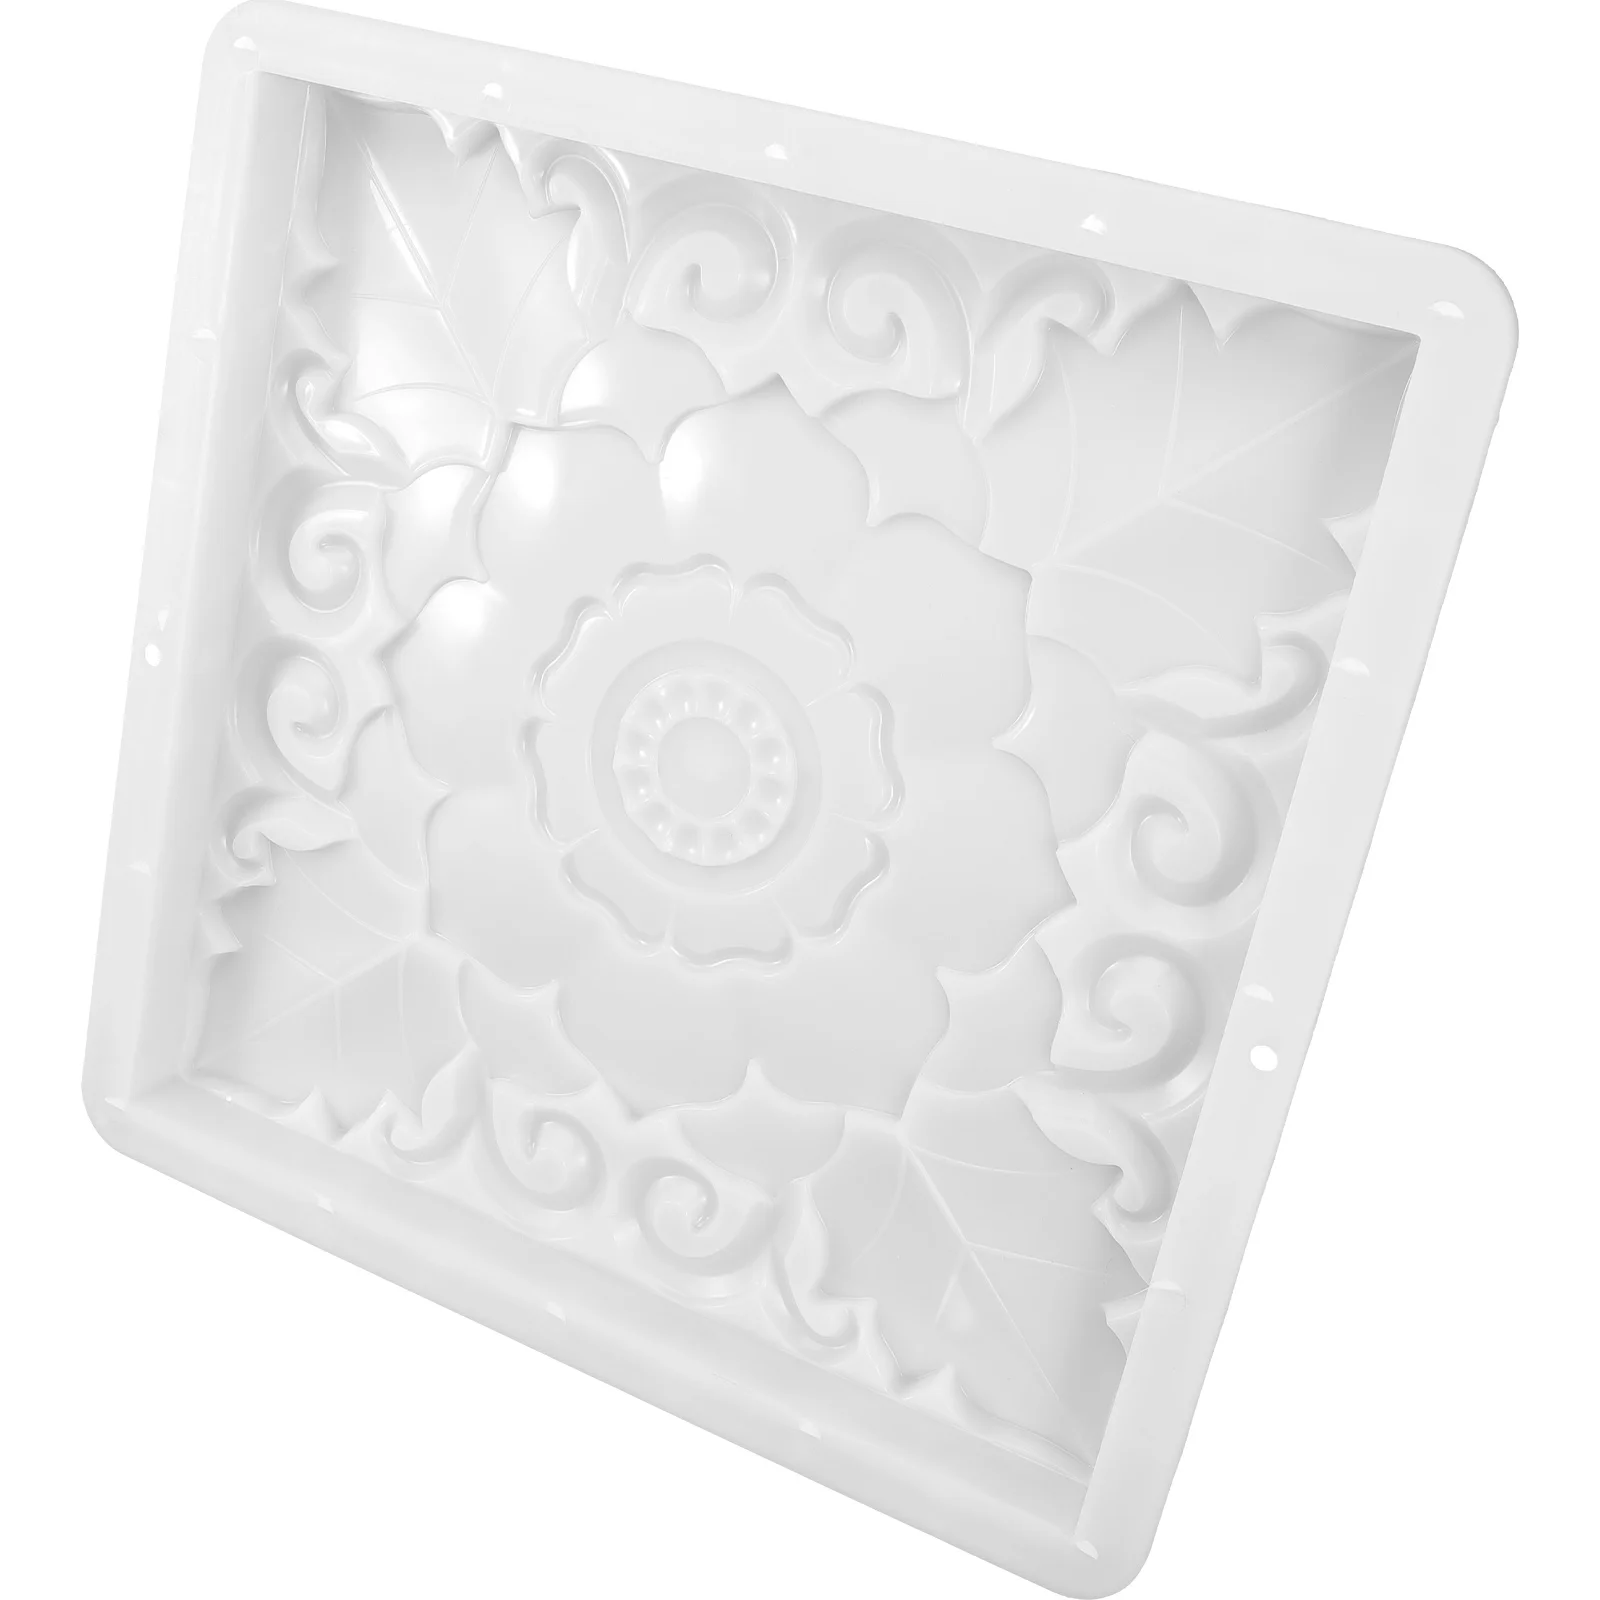 

Floor Tile Mold Concrete Mold Garden Paving Mold Chinese Style Walkway Paving Mould Paver Molds Plastic Modeling Tool